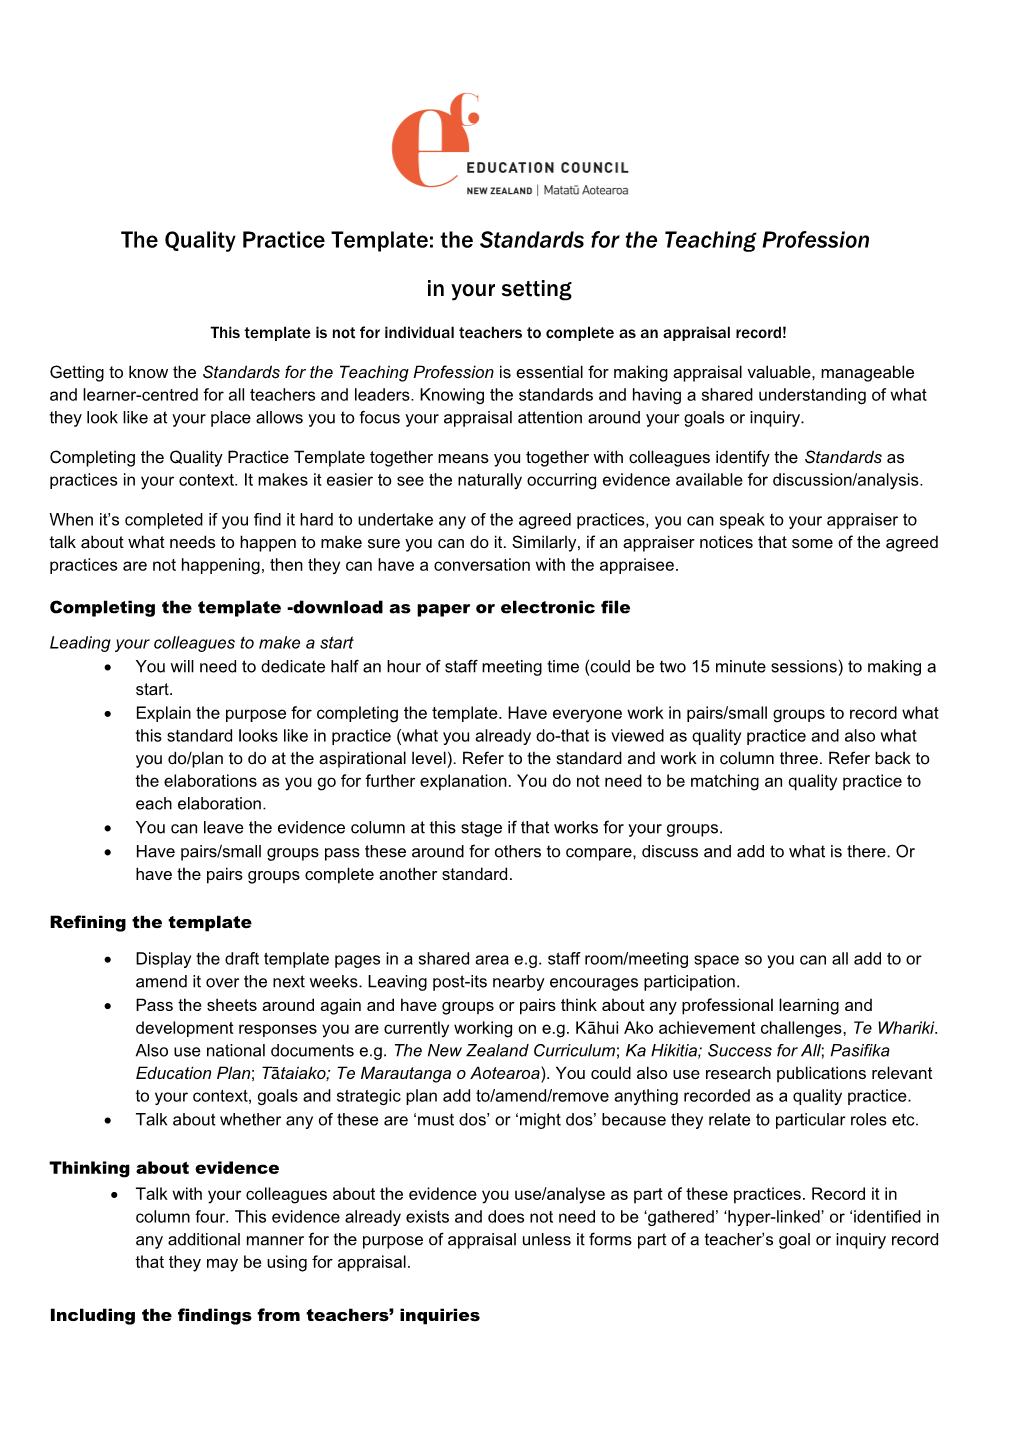 The Quality Practice Template: the Standards for the Teaching Profession